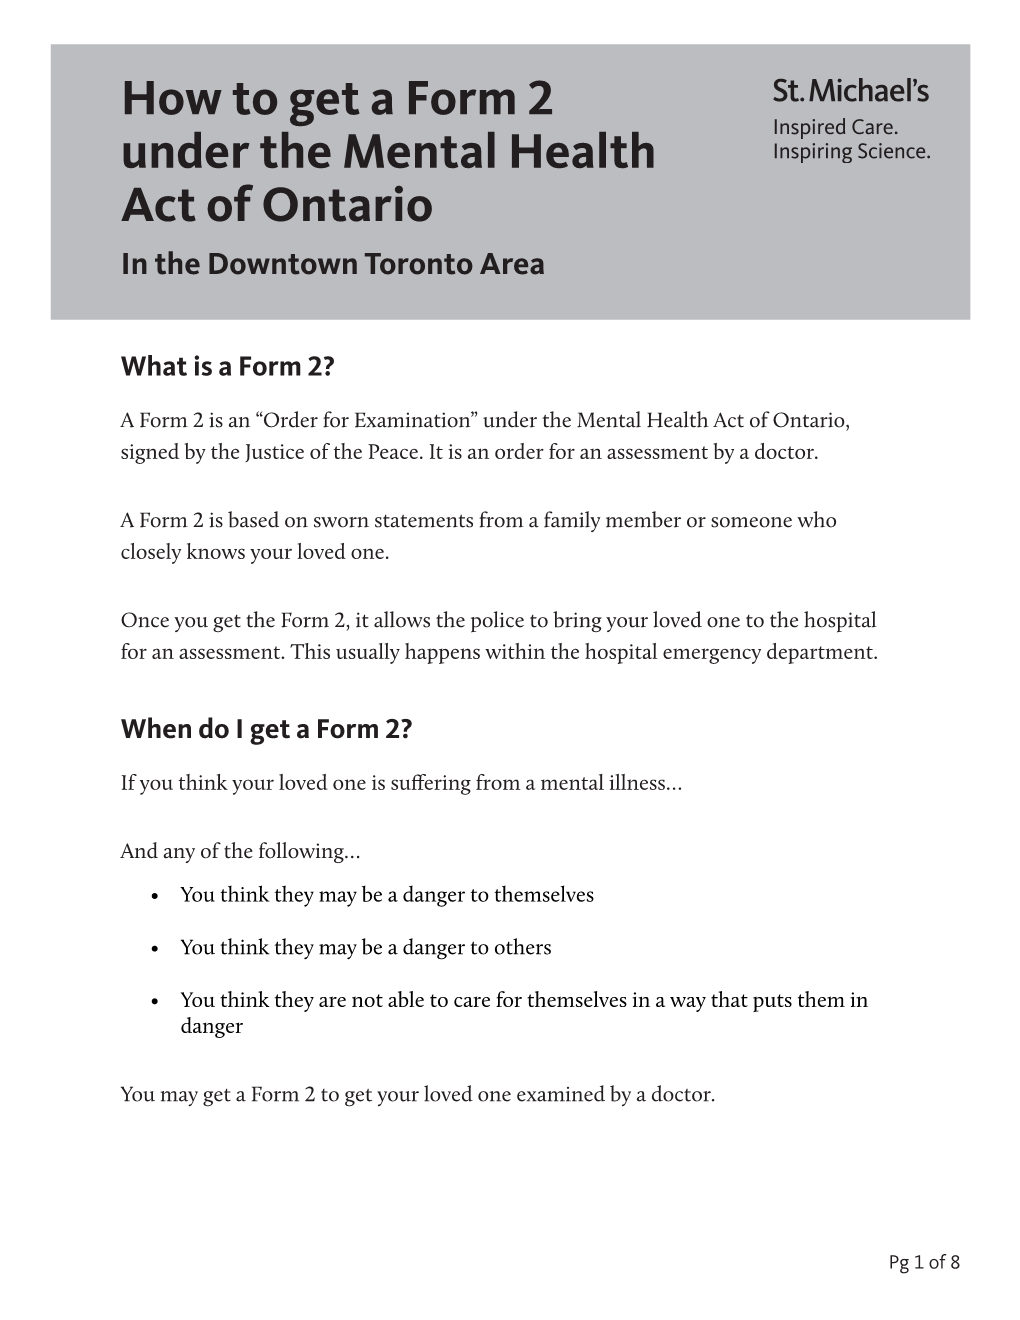 How to Get a Form 2 Under the Mental Health Act of Ontario in the Downtown Toronto Area